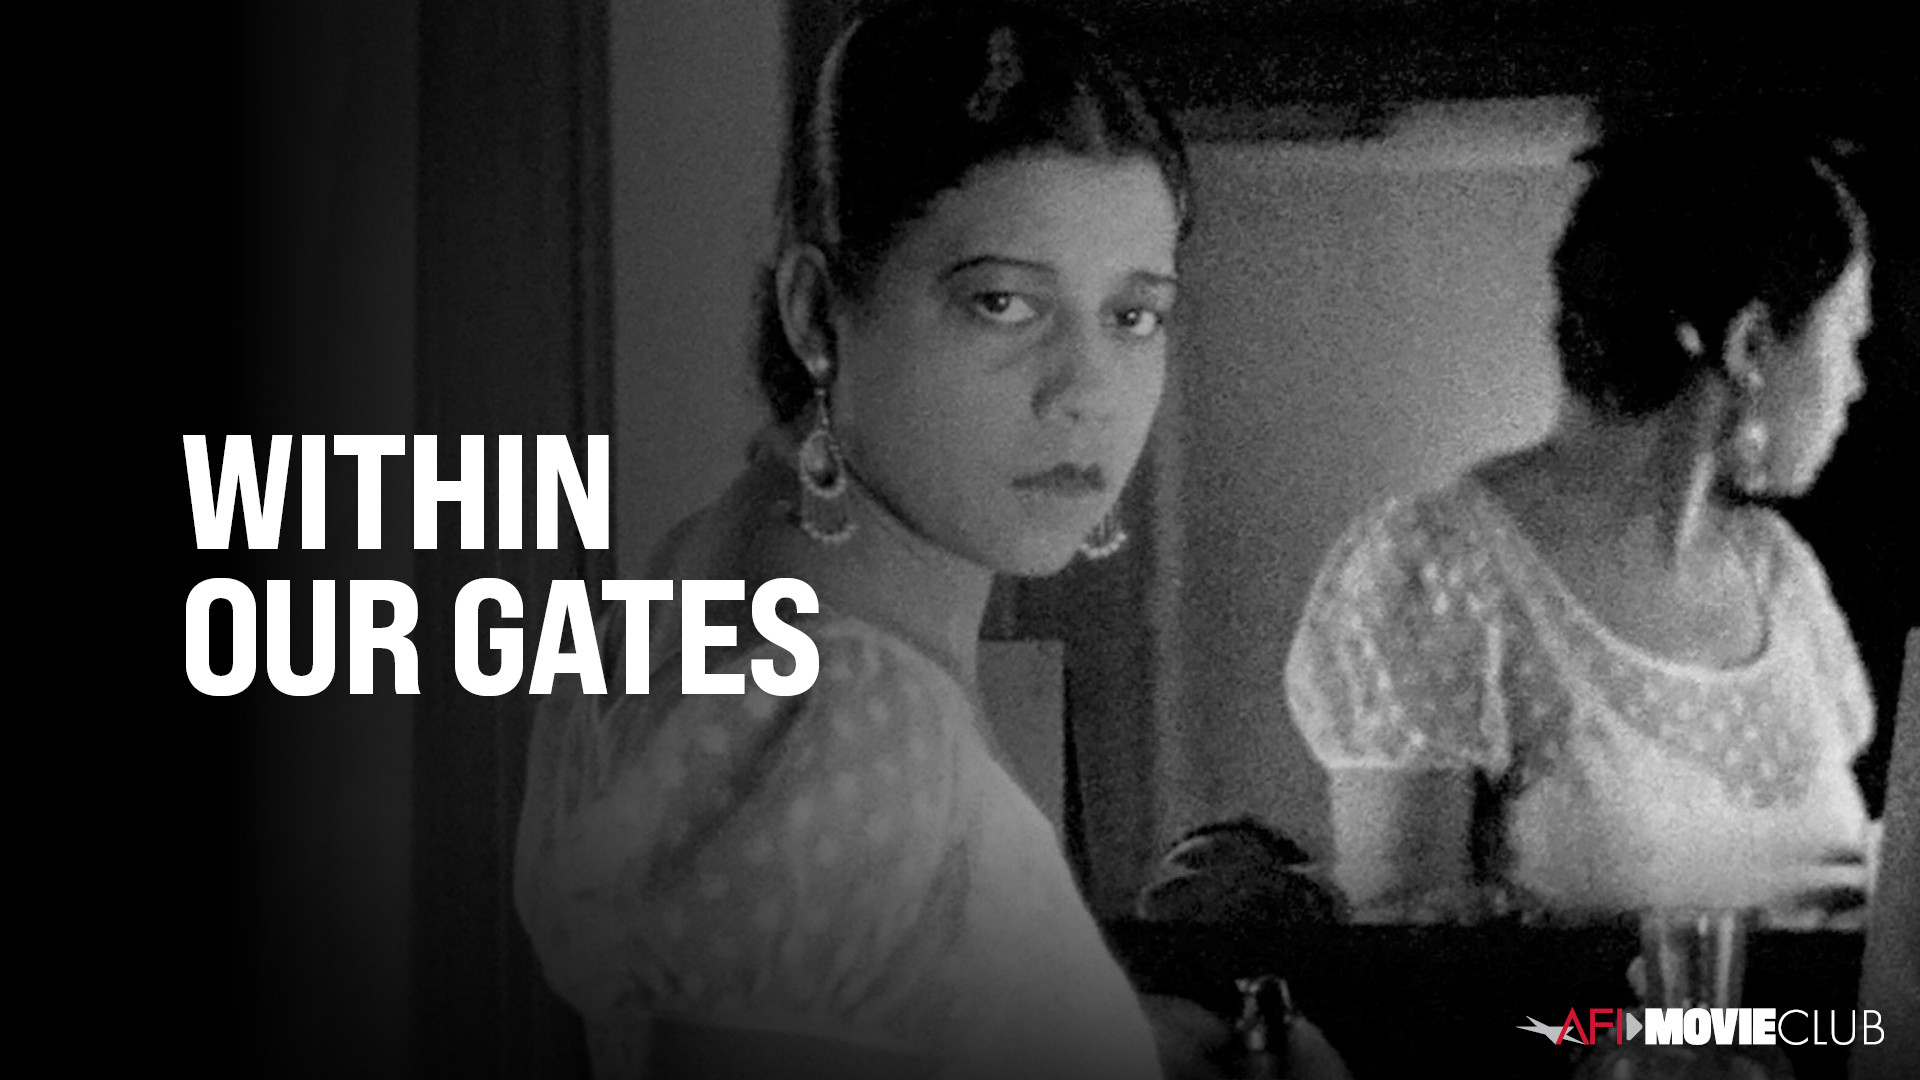 Within Our Gates Film Still - Evelyn Preer